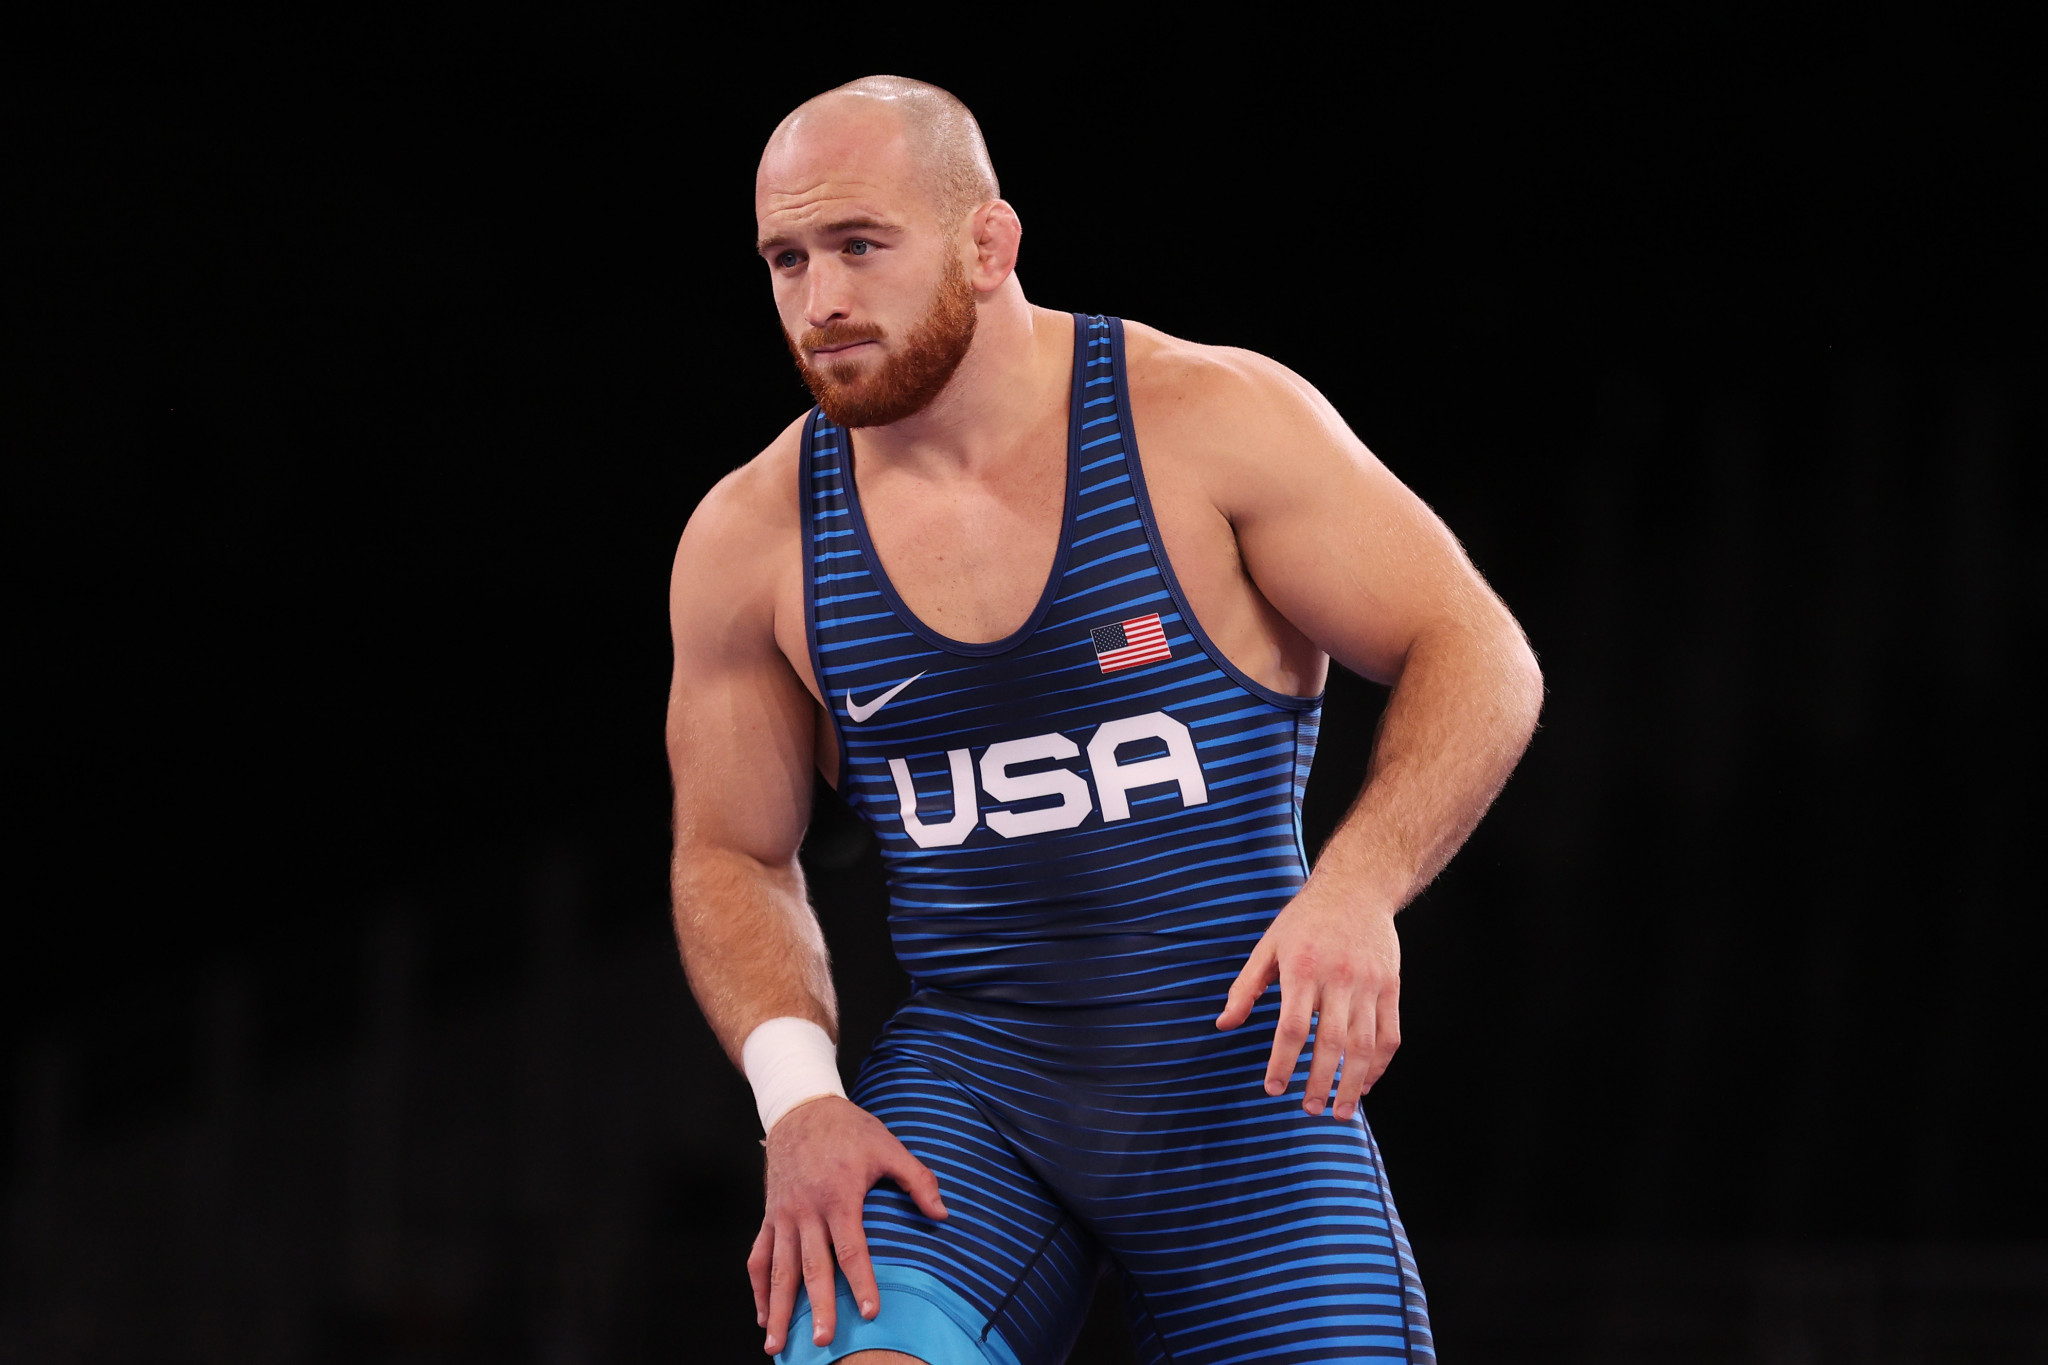 Kyle Frederick Snyder won his third world title in the men's 97kg category at the World Wrestling Championships ©Getty Images